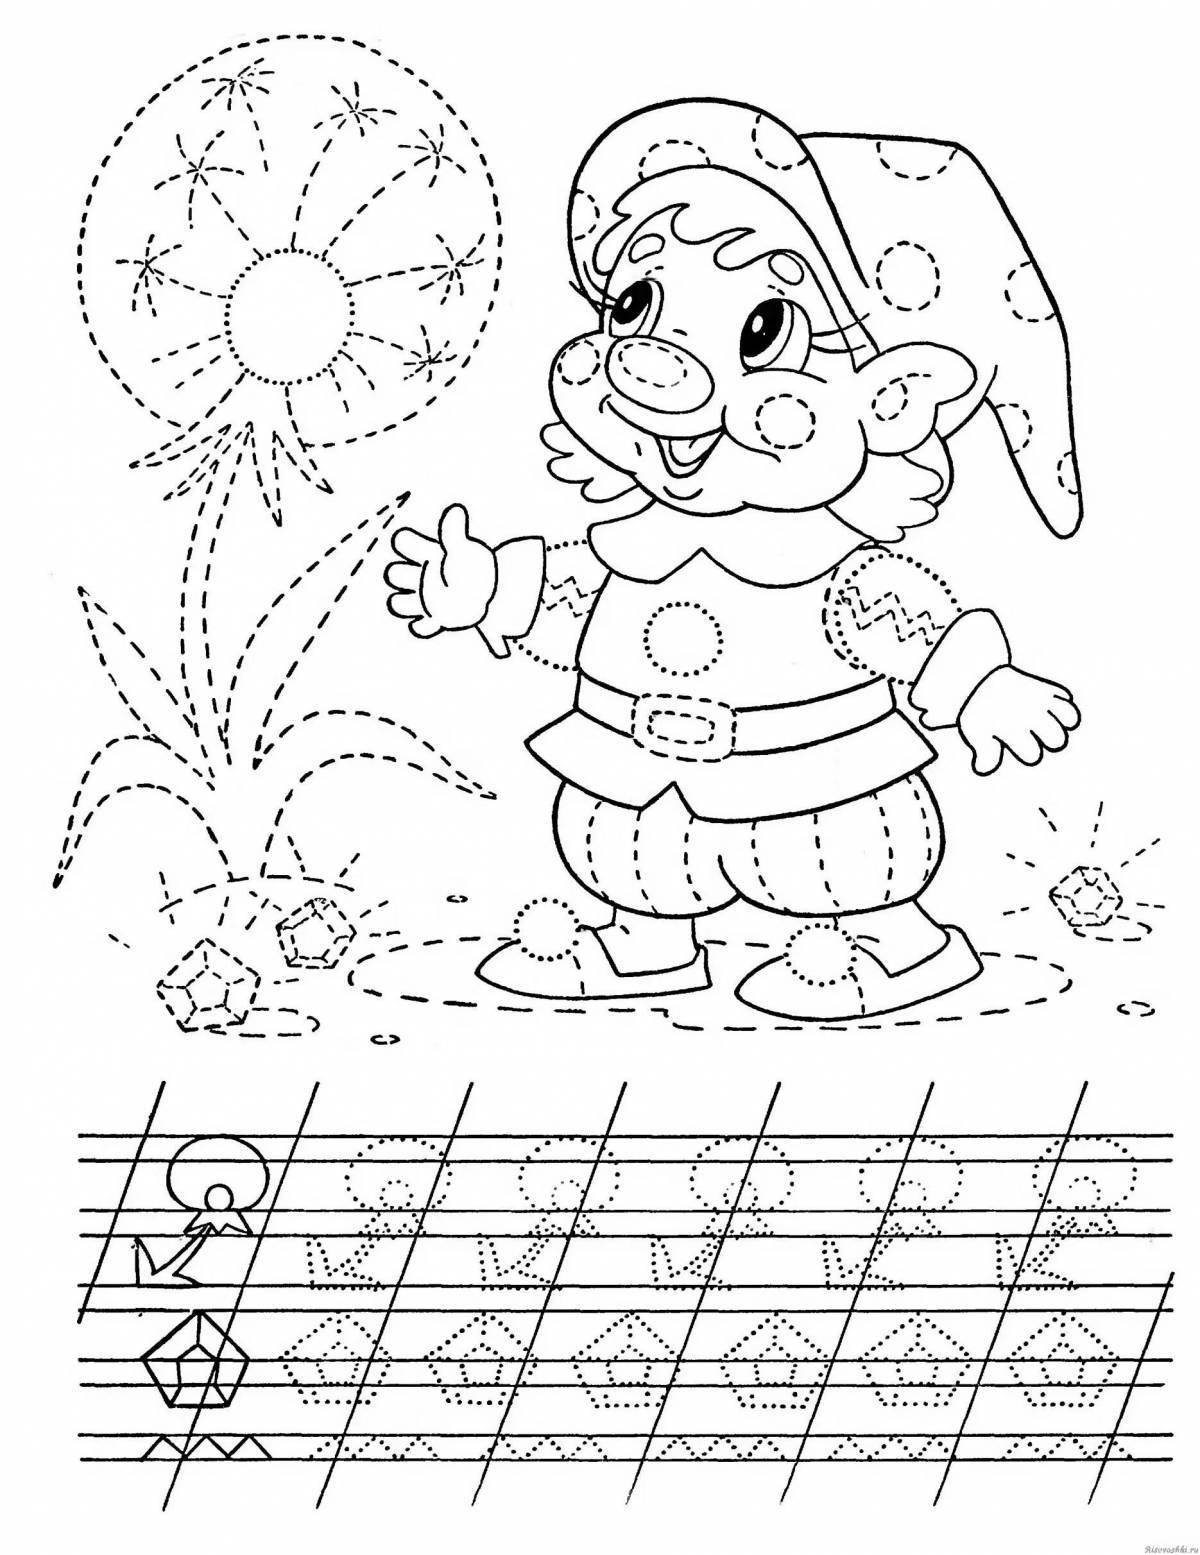 Playful recipe coloring book for kids